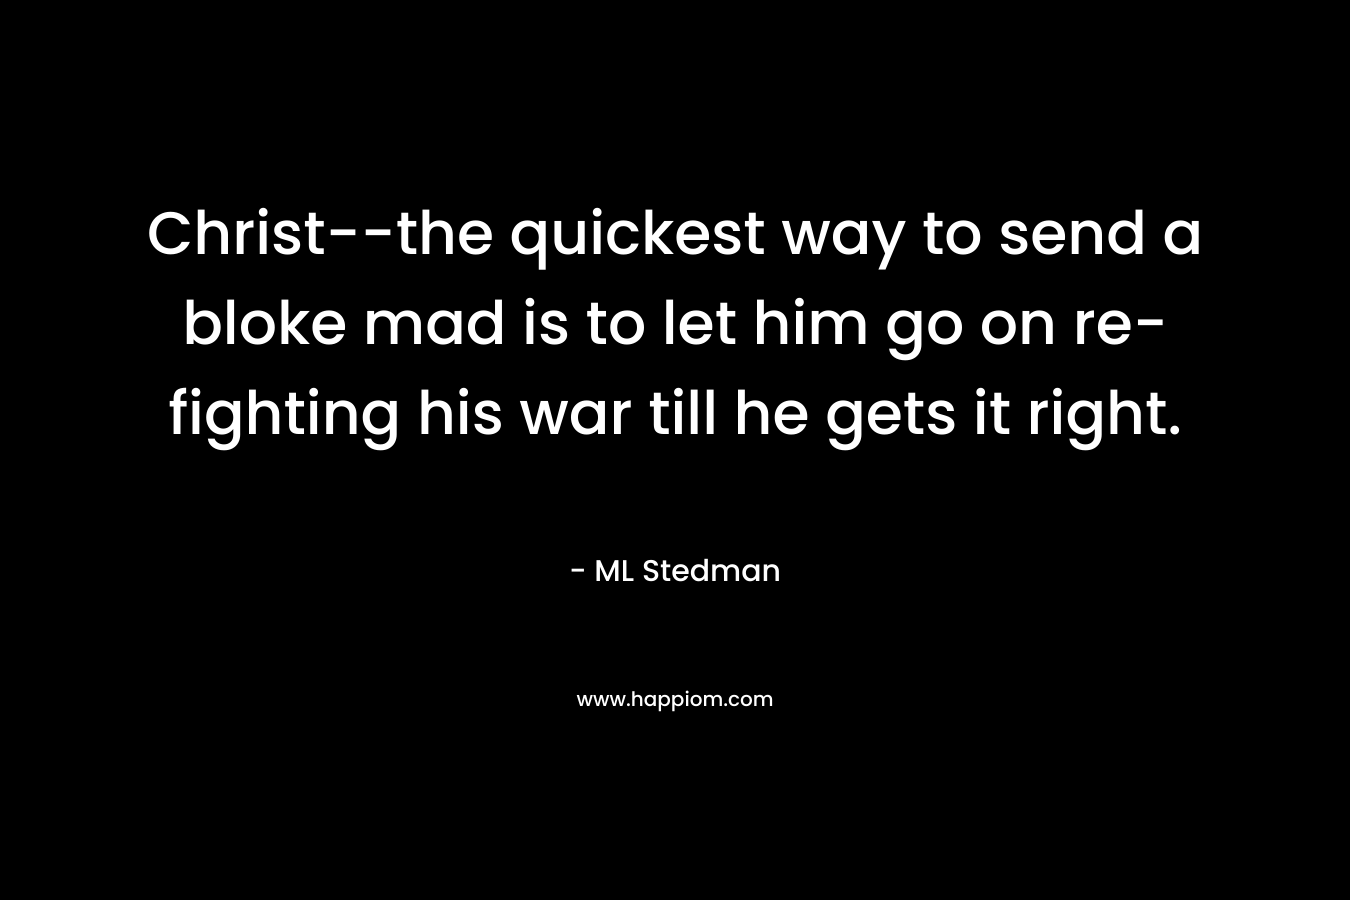 Christ–the quickest way to send a bloke mad is to let him go on re-fighting his war till he gets it right. – ML Stedman